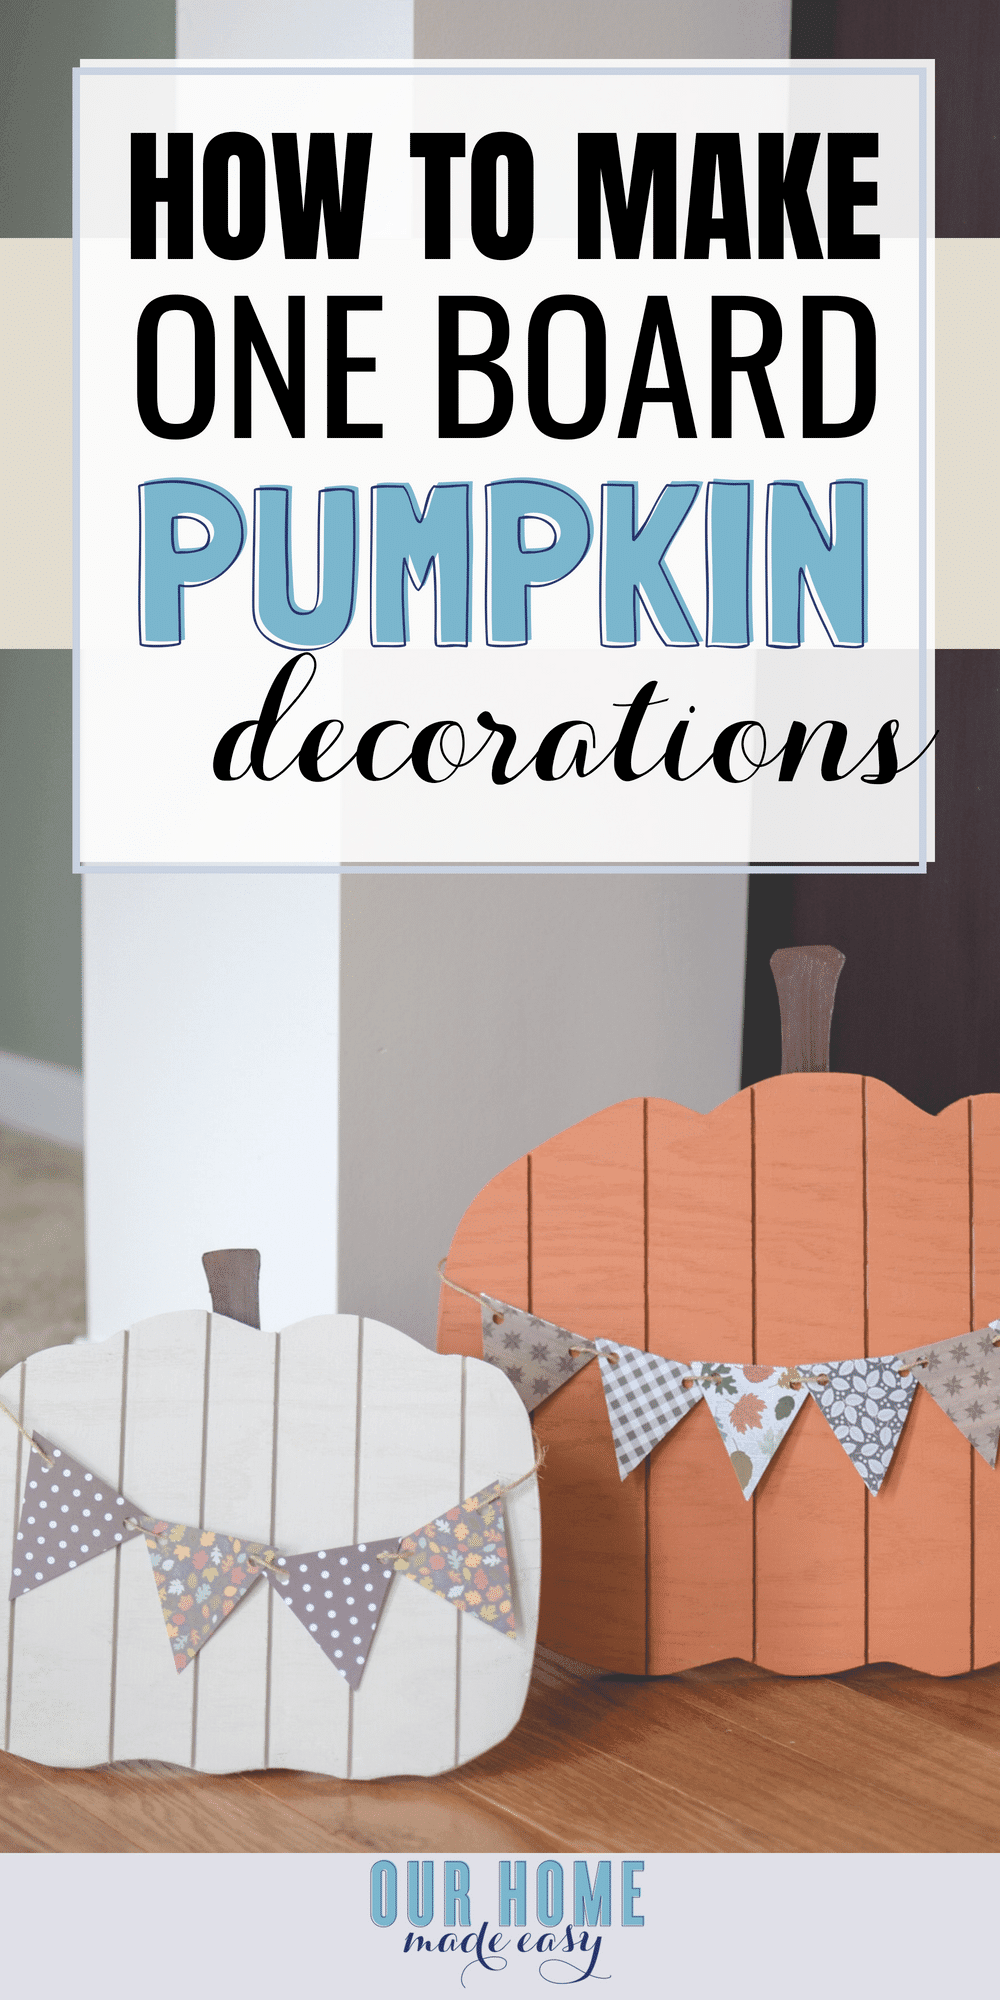 Use leftover plywood to build these cute little wood pumpkins! They are virtually free to DIY & are super cute for around your home! #pumpkins #fall #home #thanksgiving